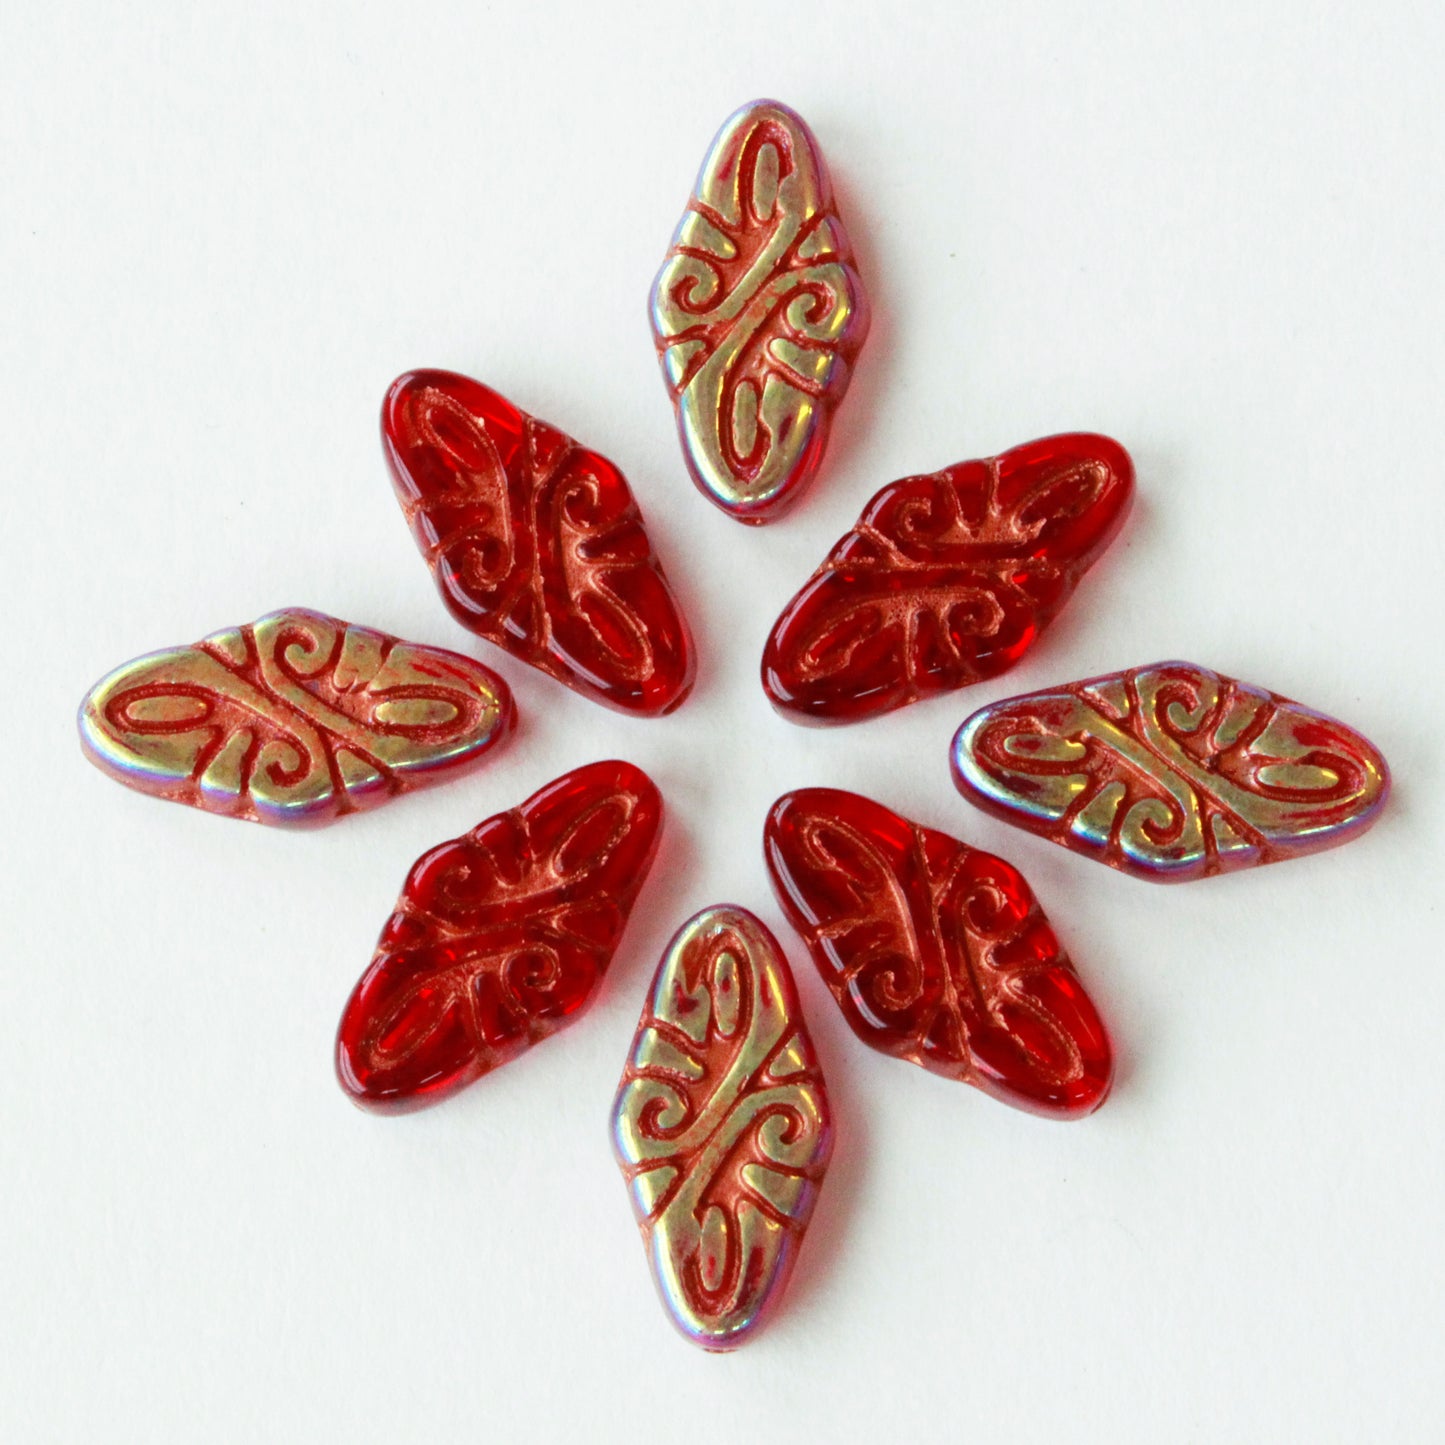 9x19mm Arabesque Beads - Red with Iridescent finish - 10 or 30